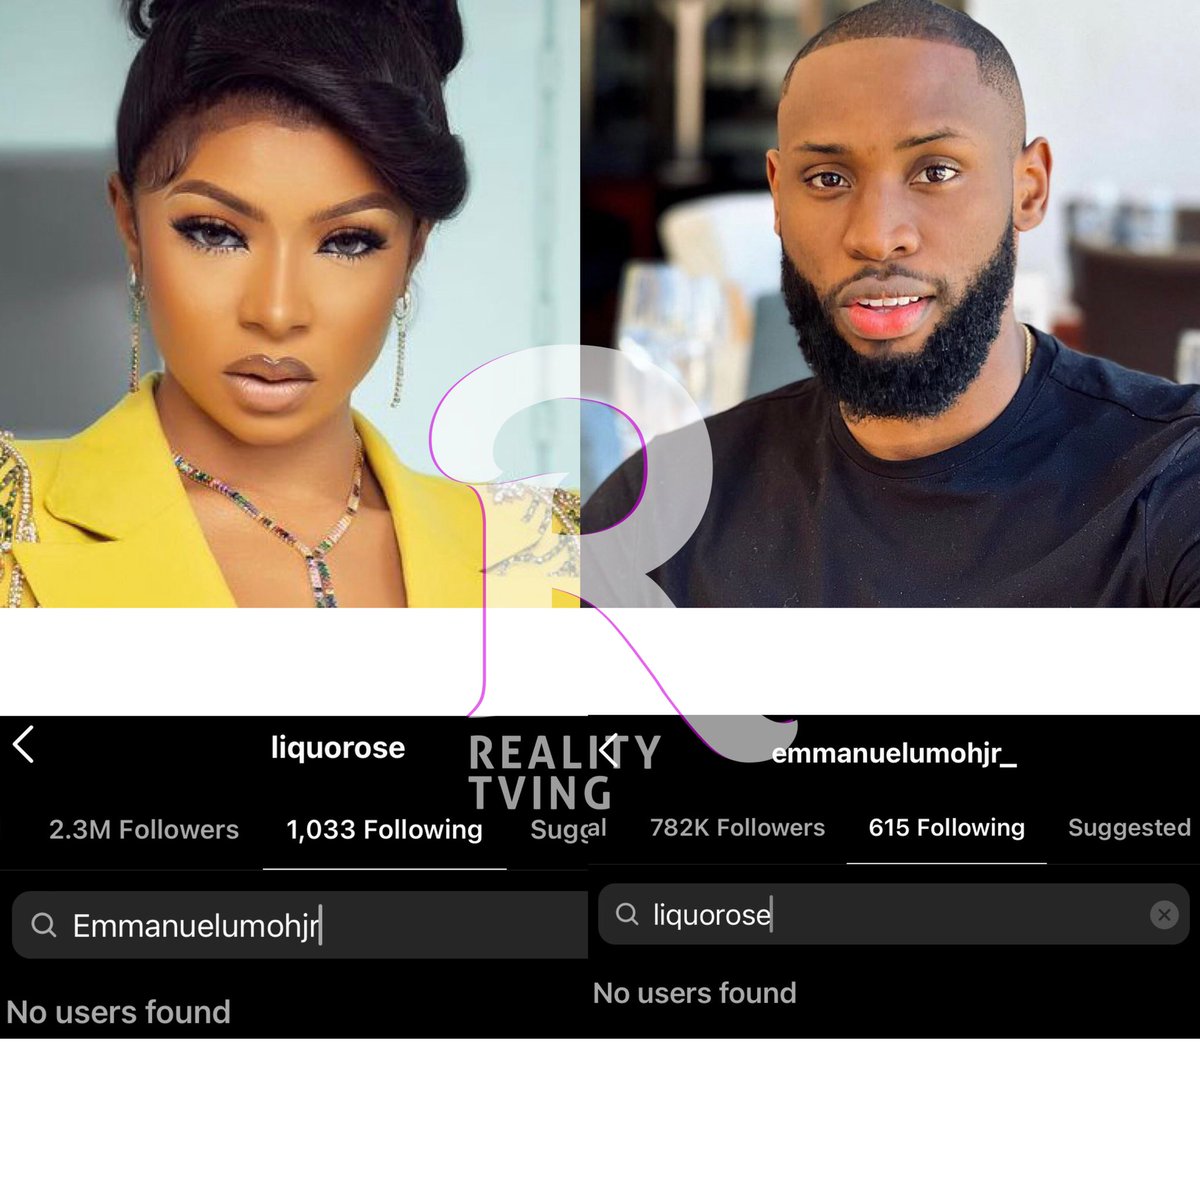 #BBNaija #Liquorose and Emmanuel, the captains of the #EmmaRose ship have unfollowed eachother on Instagram